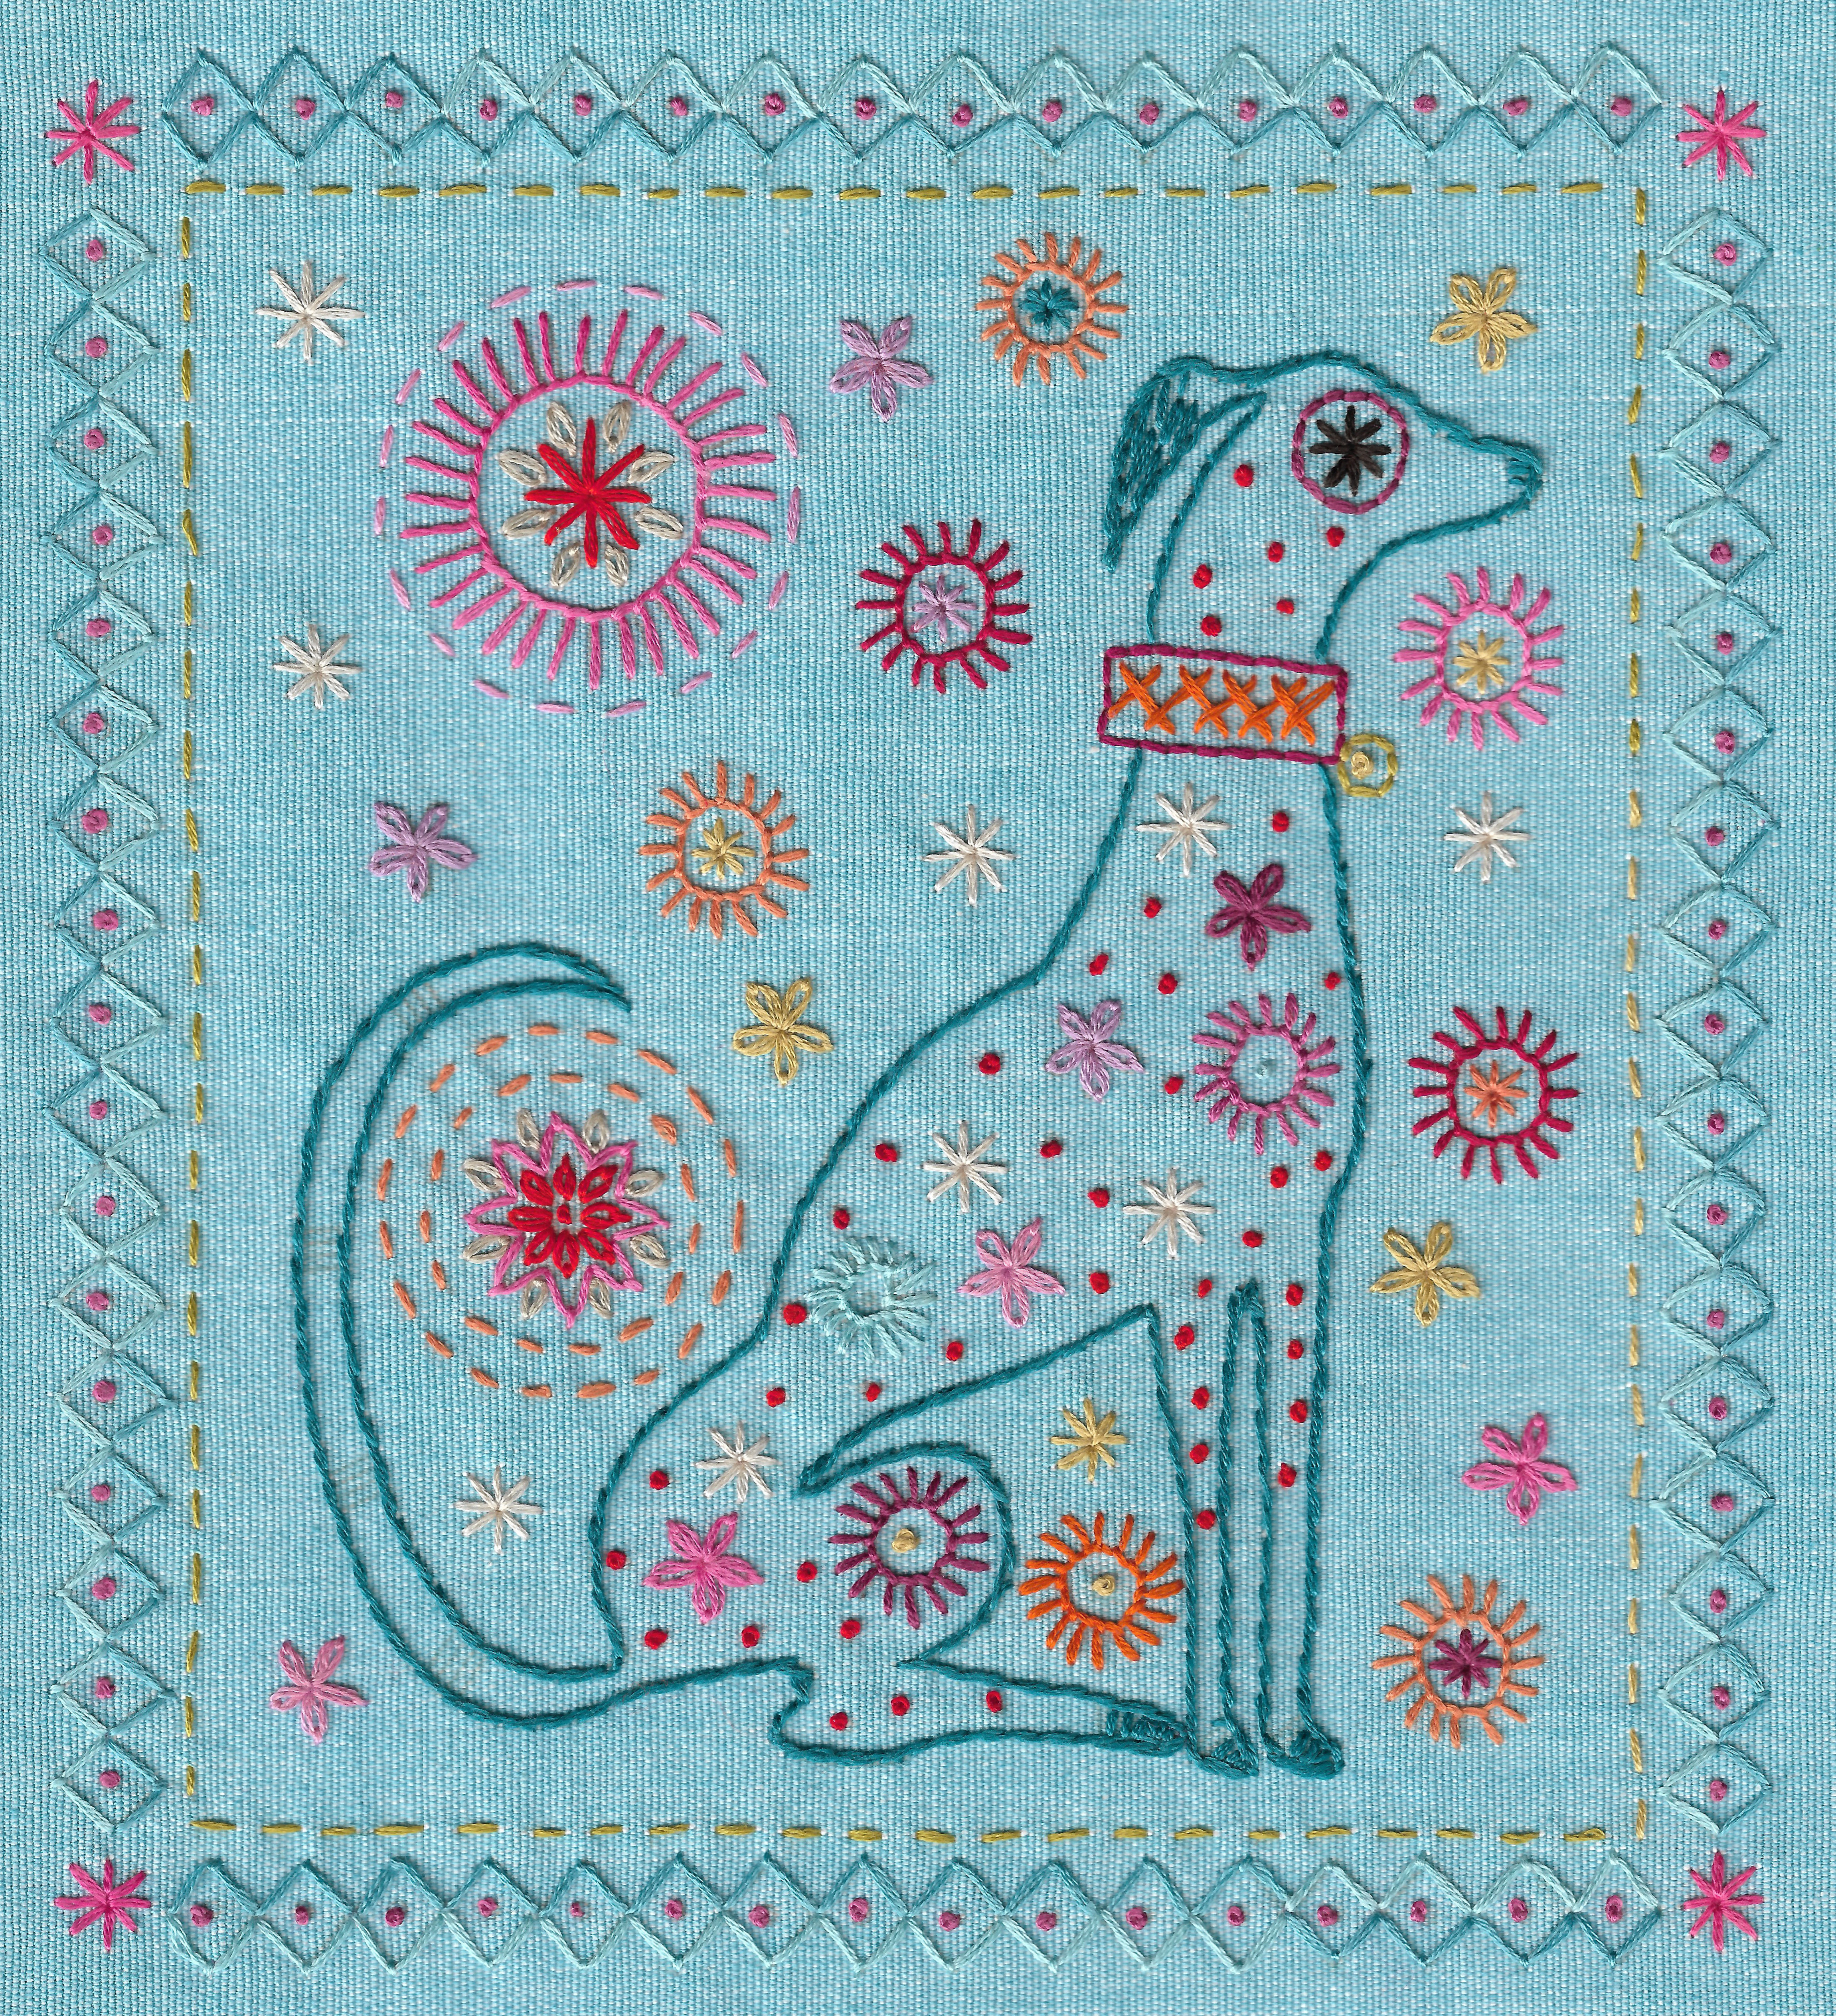 How To Transfer Embroidery Pattern Dog Iron On Transfer Embroidery Pattern